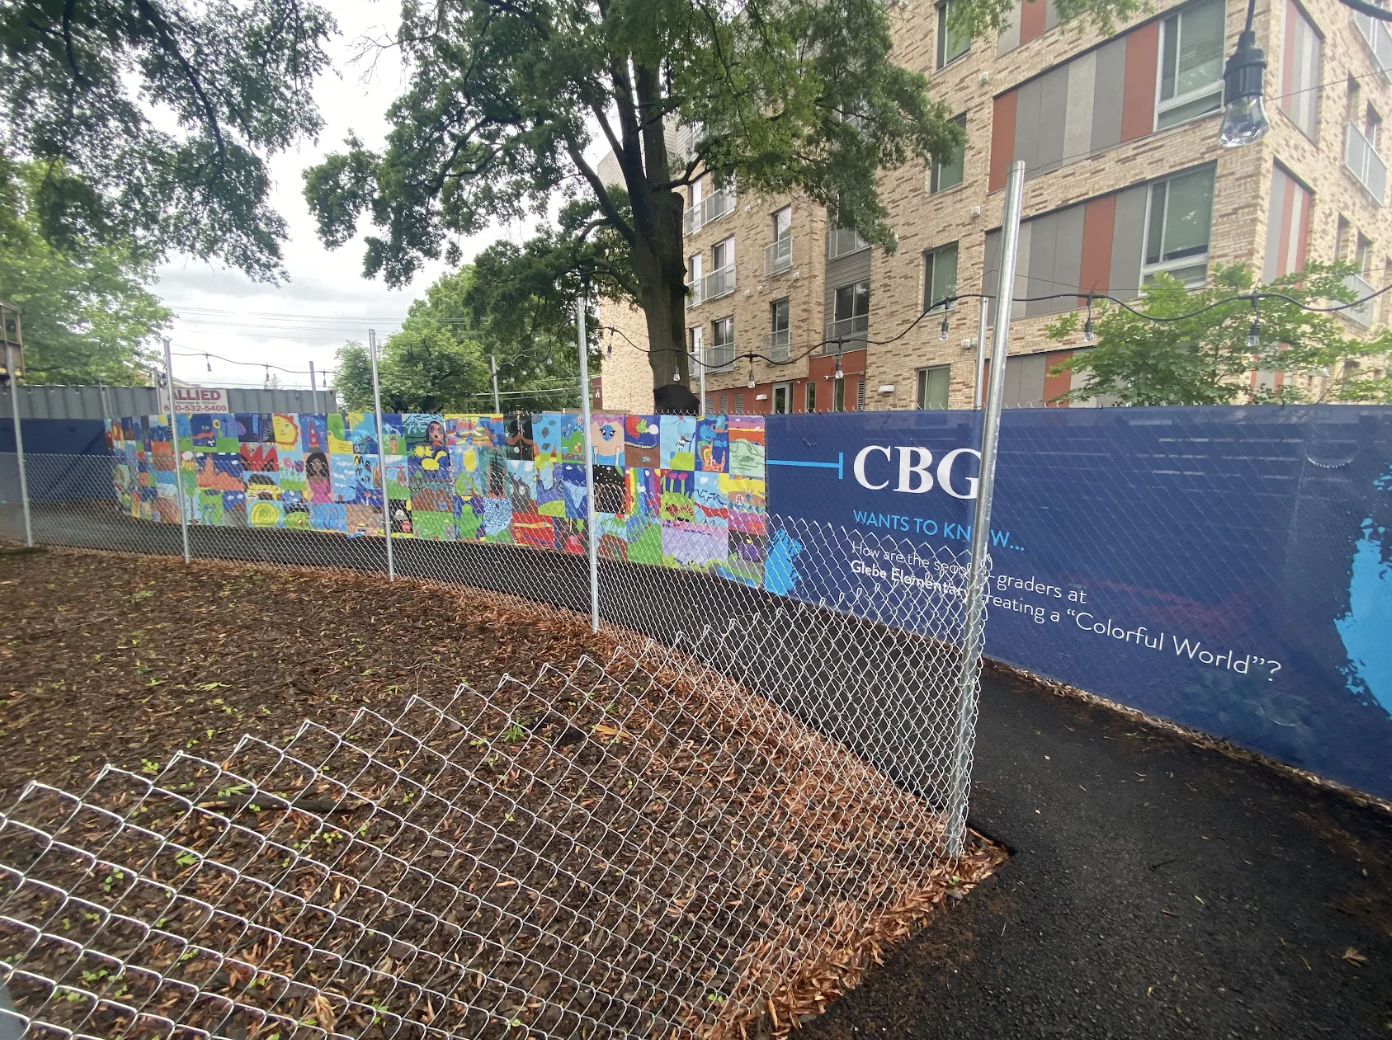 second grade art creates a colorful mosaic-style mural in a construction walkway on glebe rd.